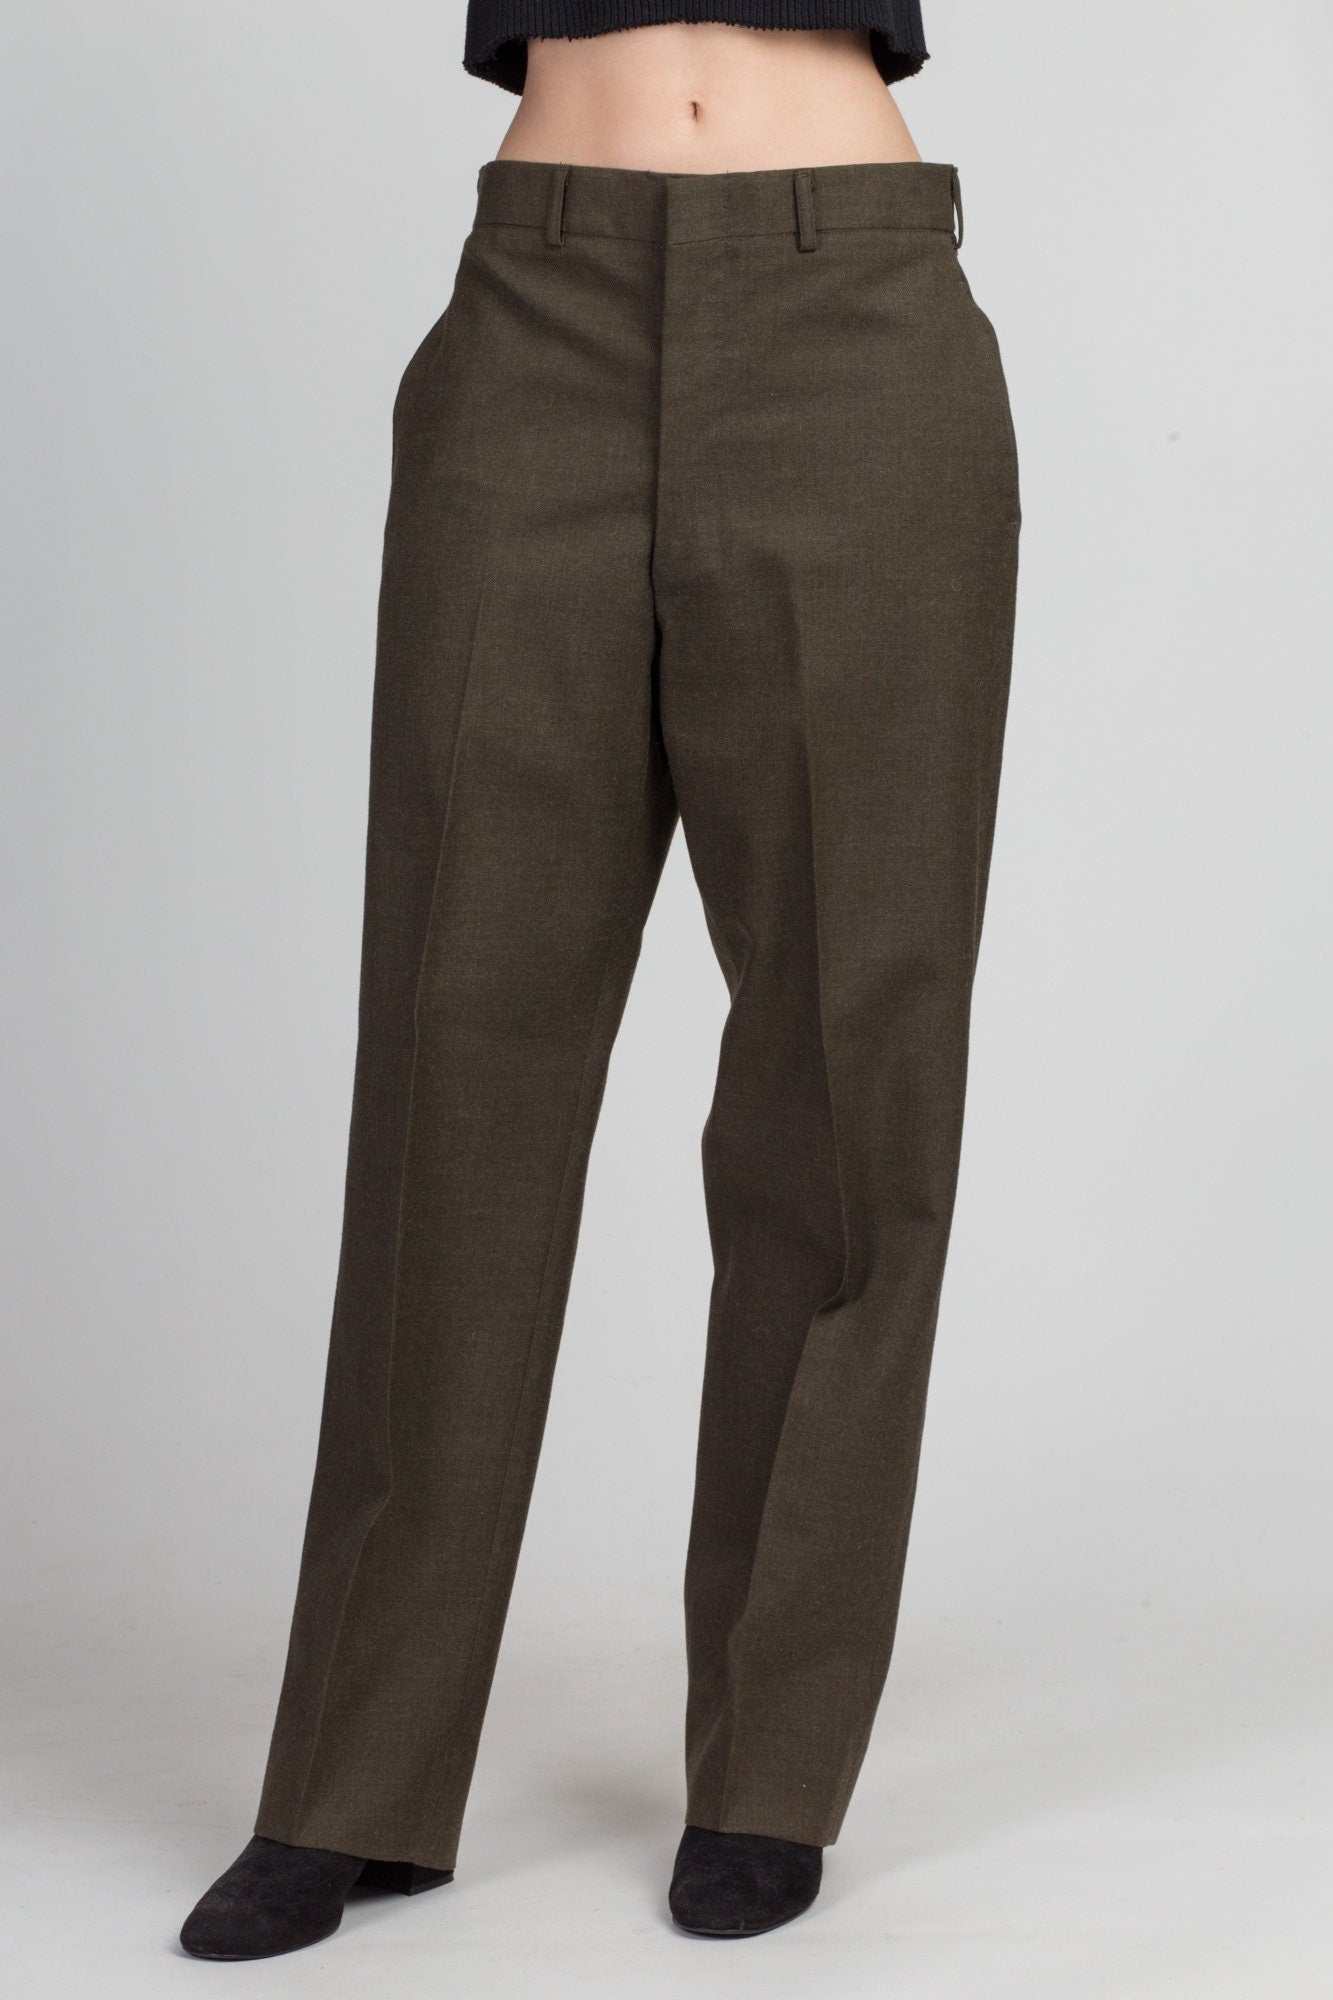 Vintage Olive Wool Men's Army Trousers - 31" Waist 